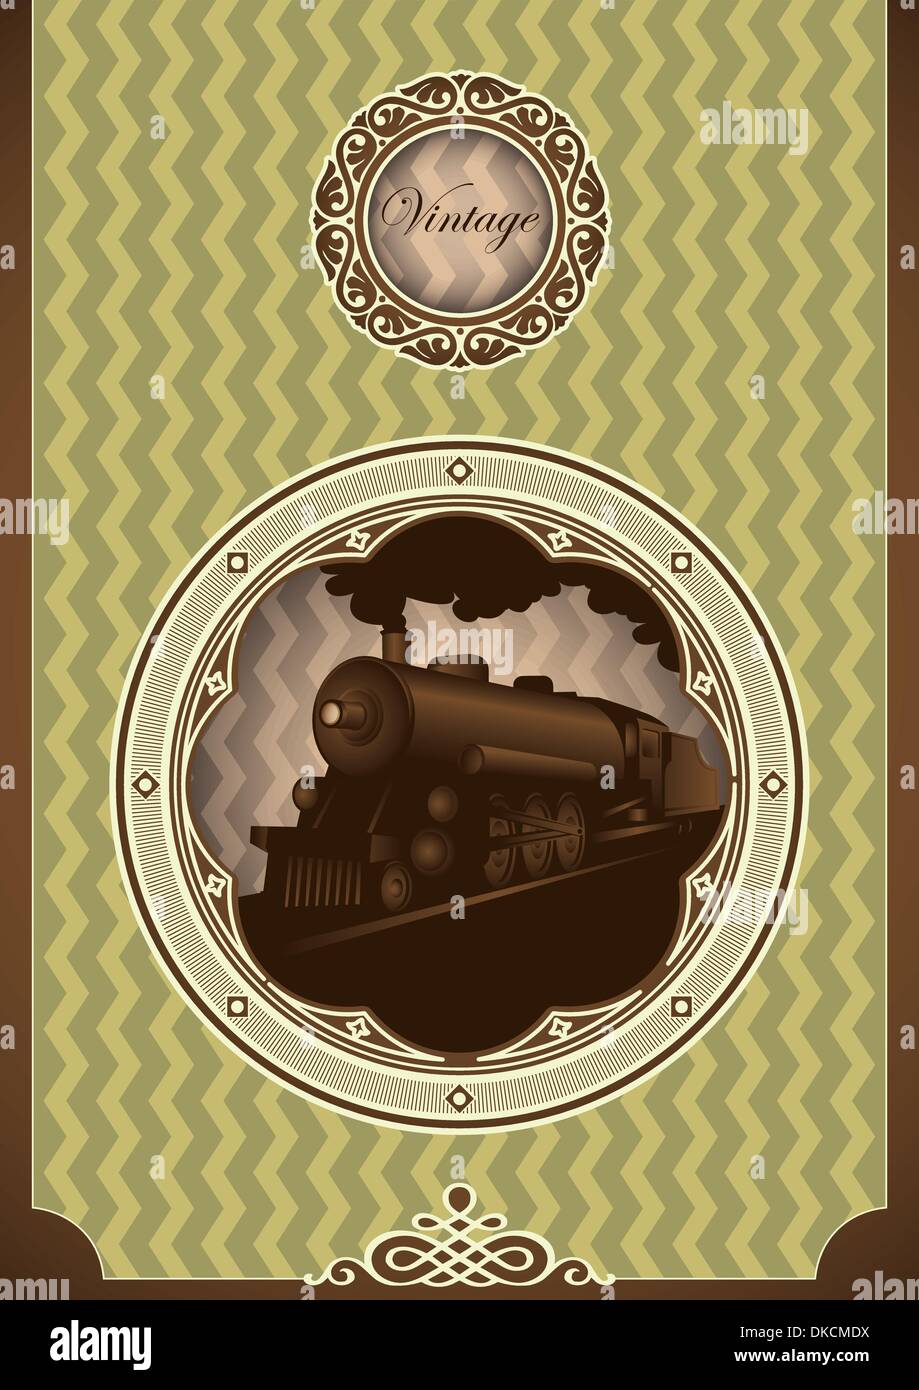 Vintage poster with locomotive Stock Vector